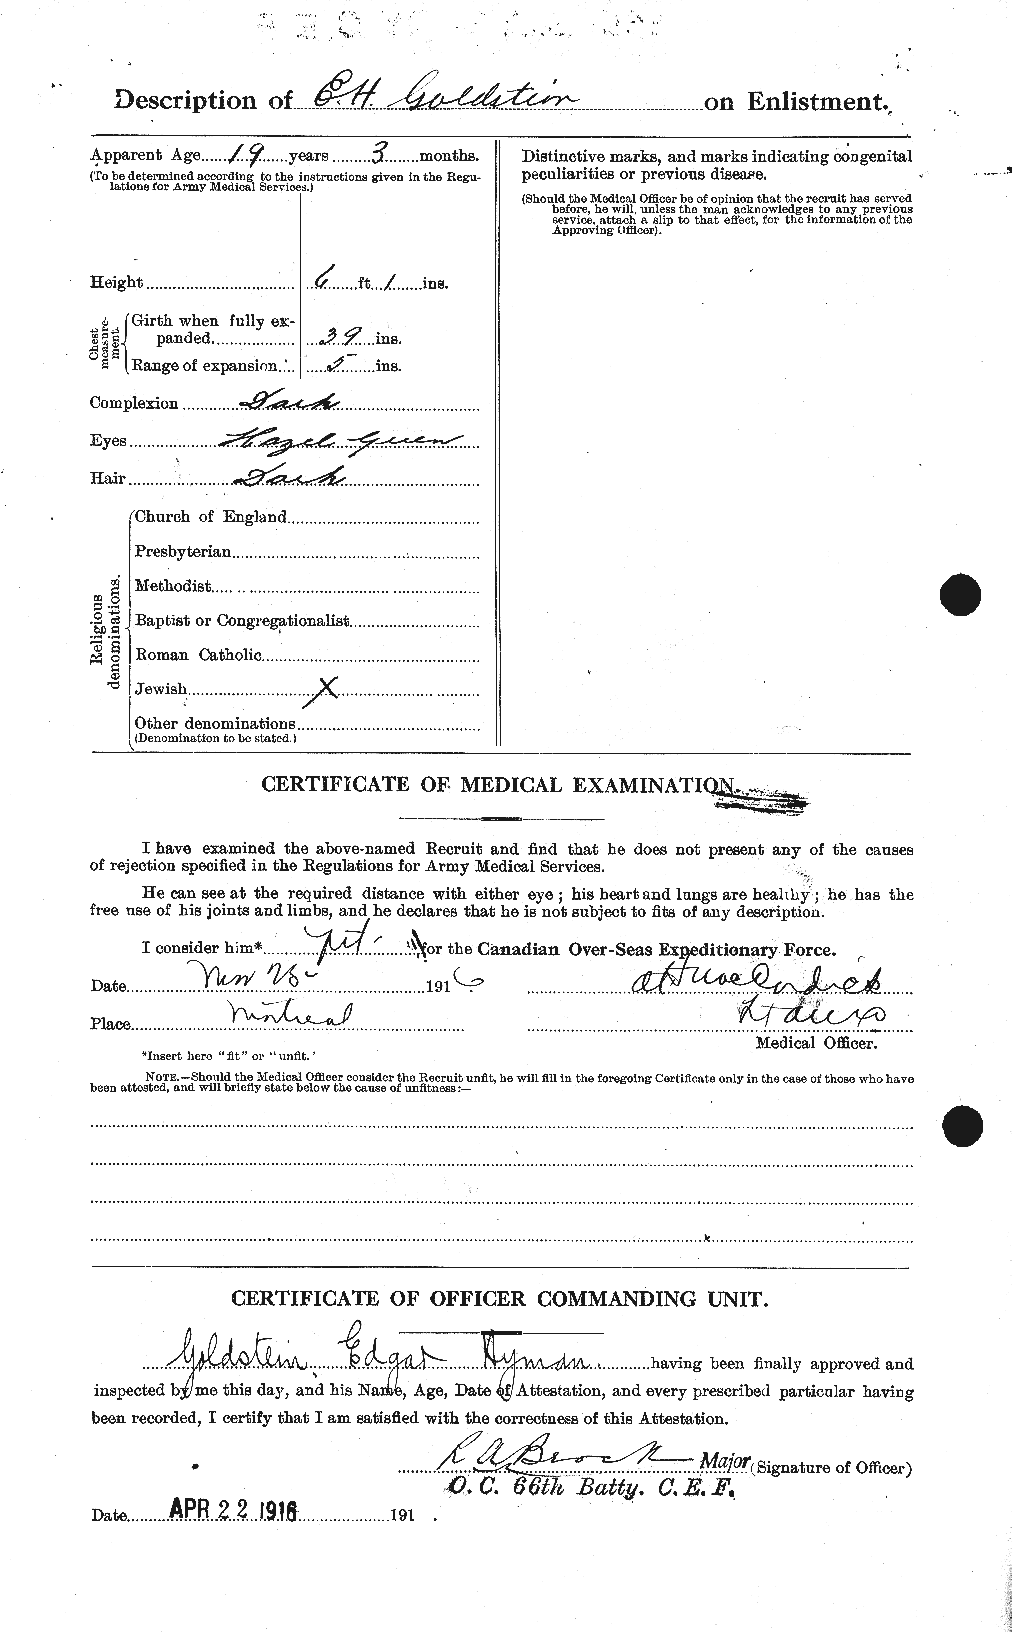 Personnel Records of the First World War - CEF 354118b